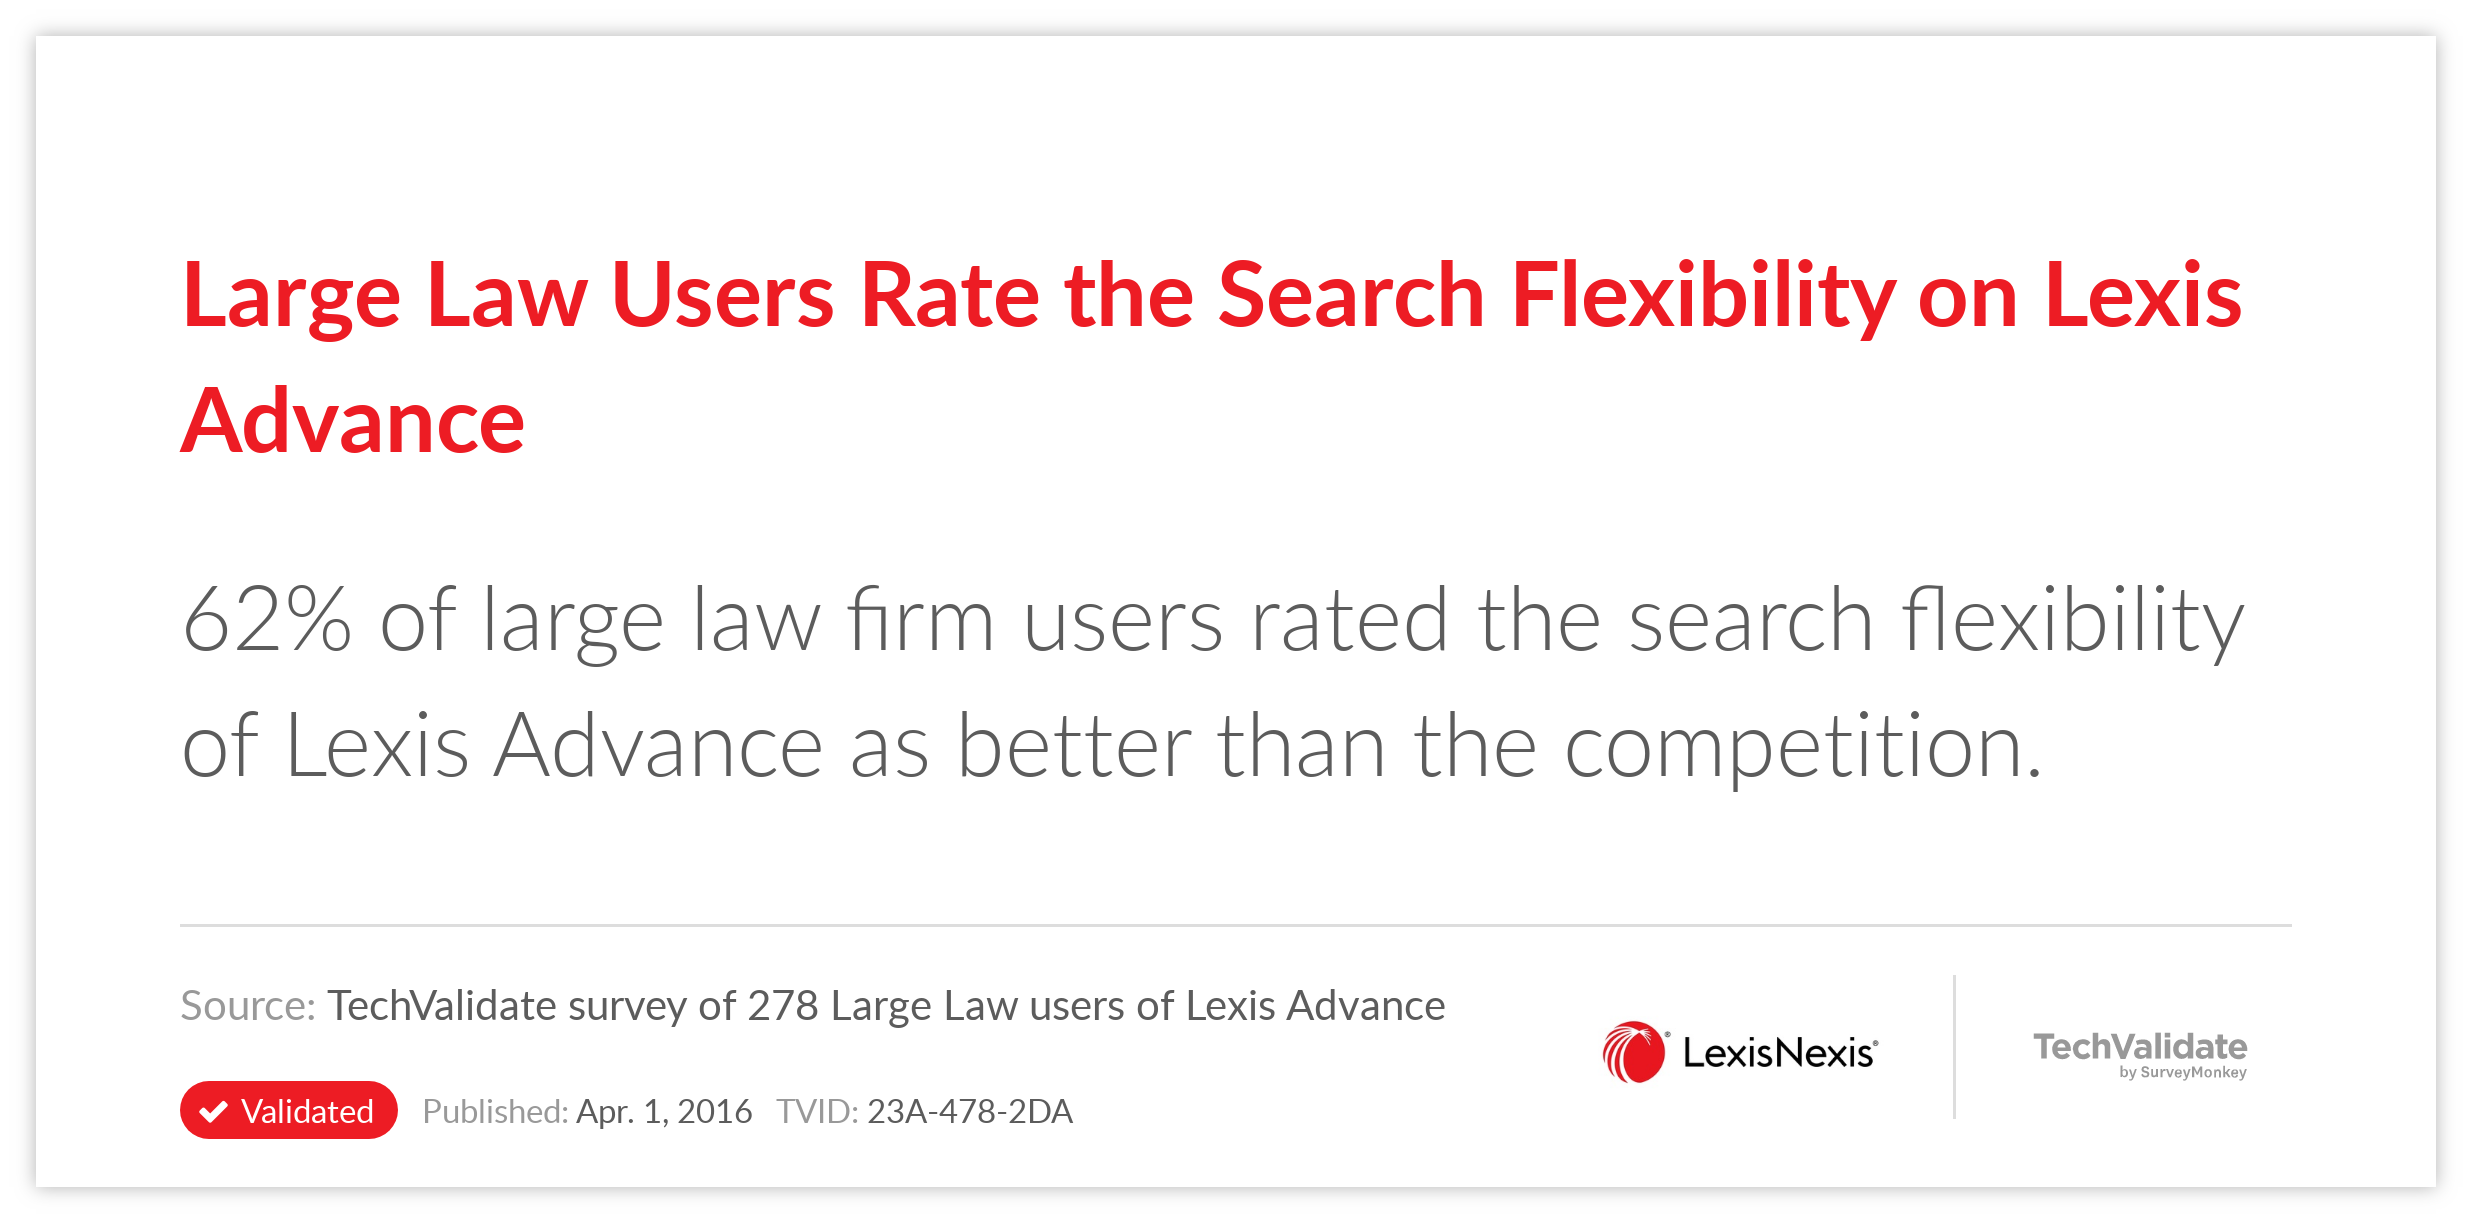 Large Law Users Rate the Search Flexibility on Lexis Advance